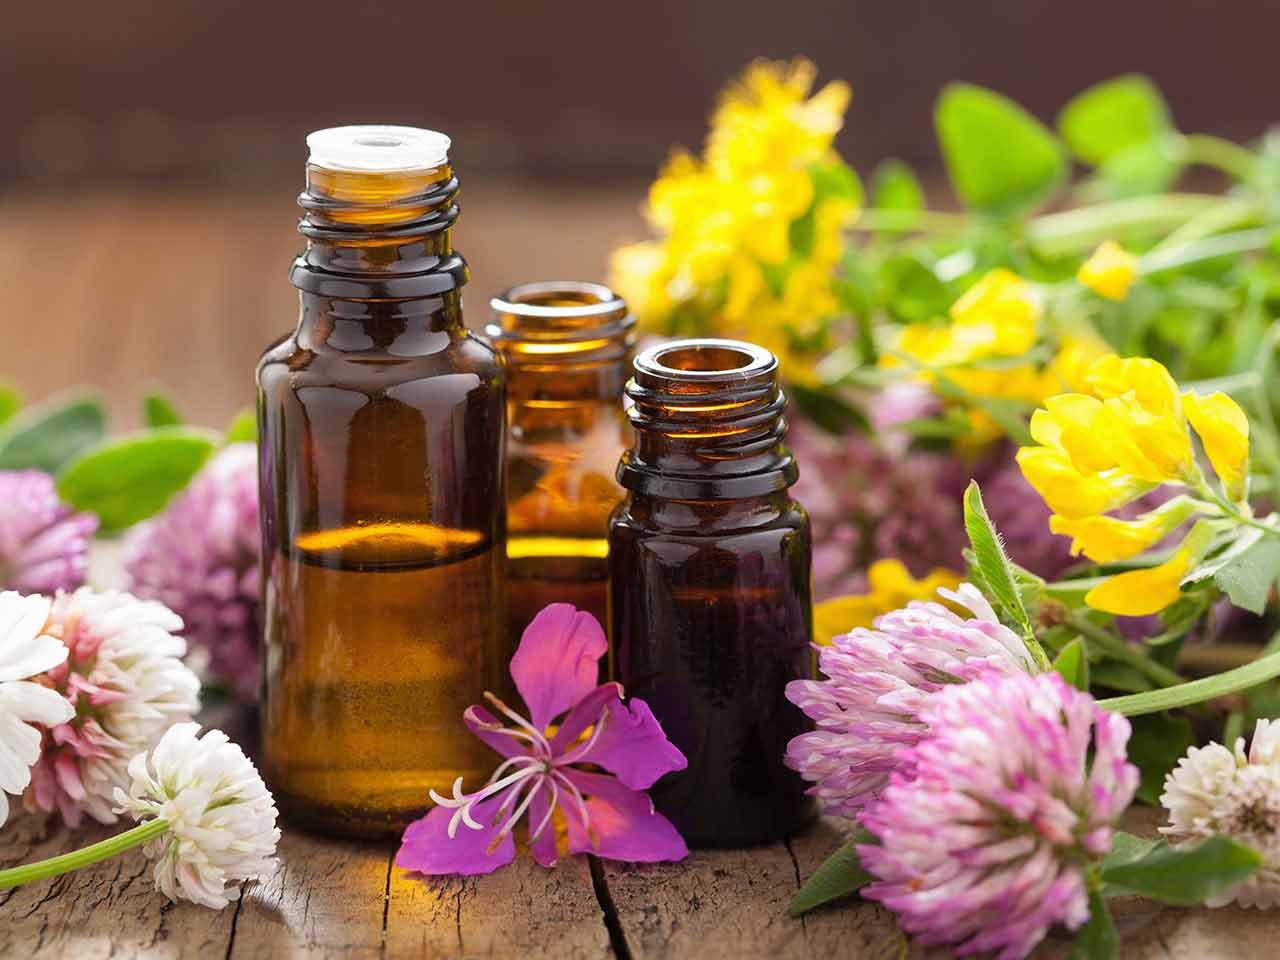 Essential oil bottles on wooden table with flowers